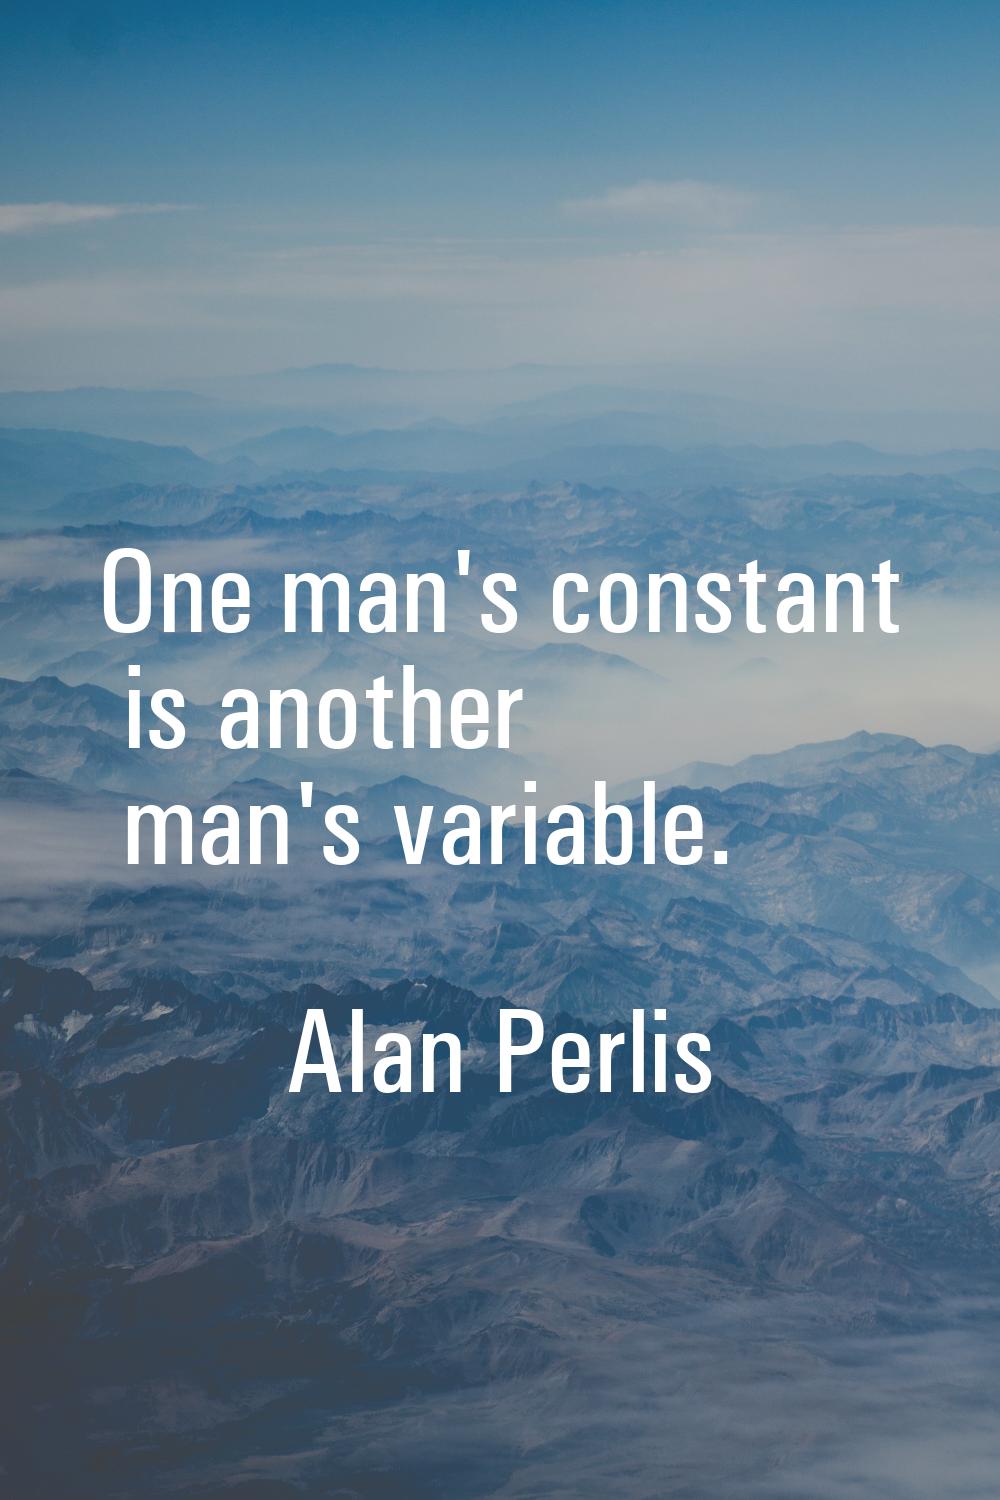 One man's constant is another man's variable.